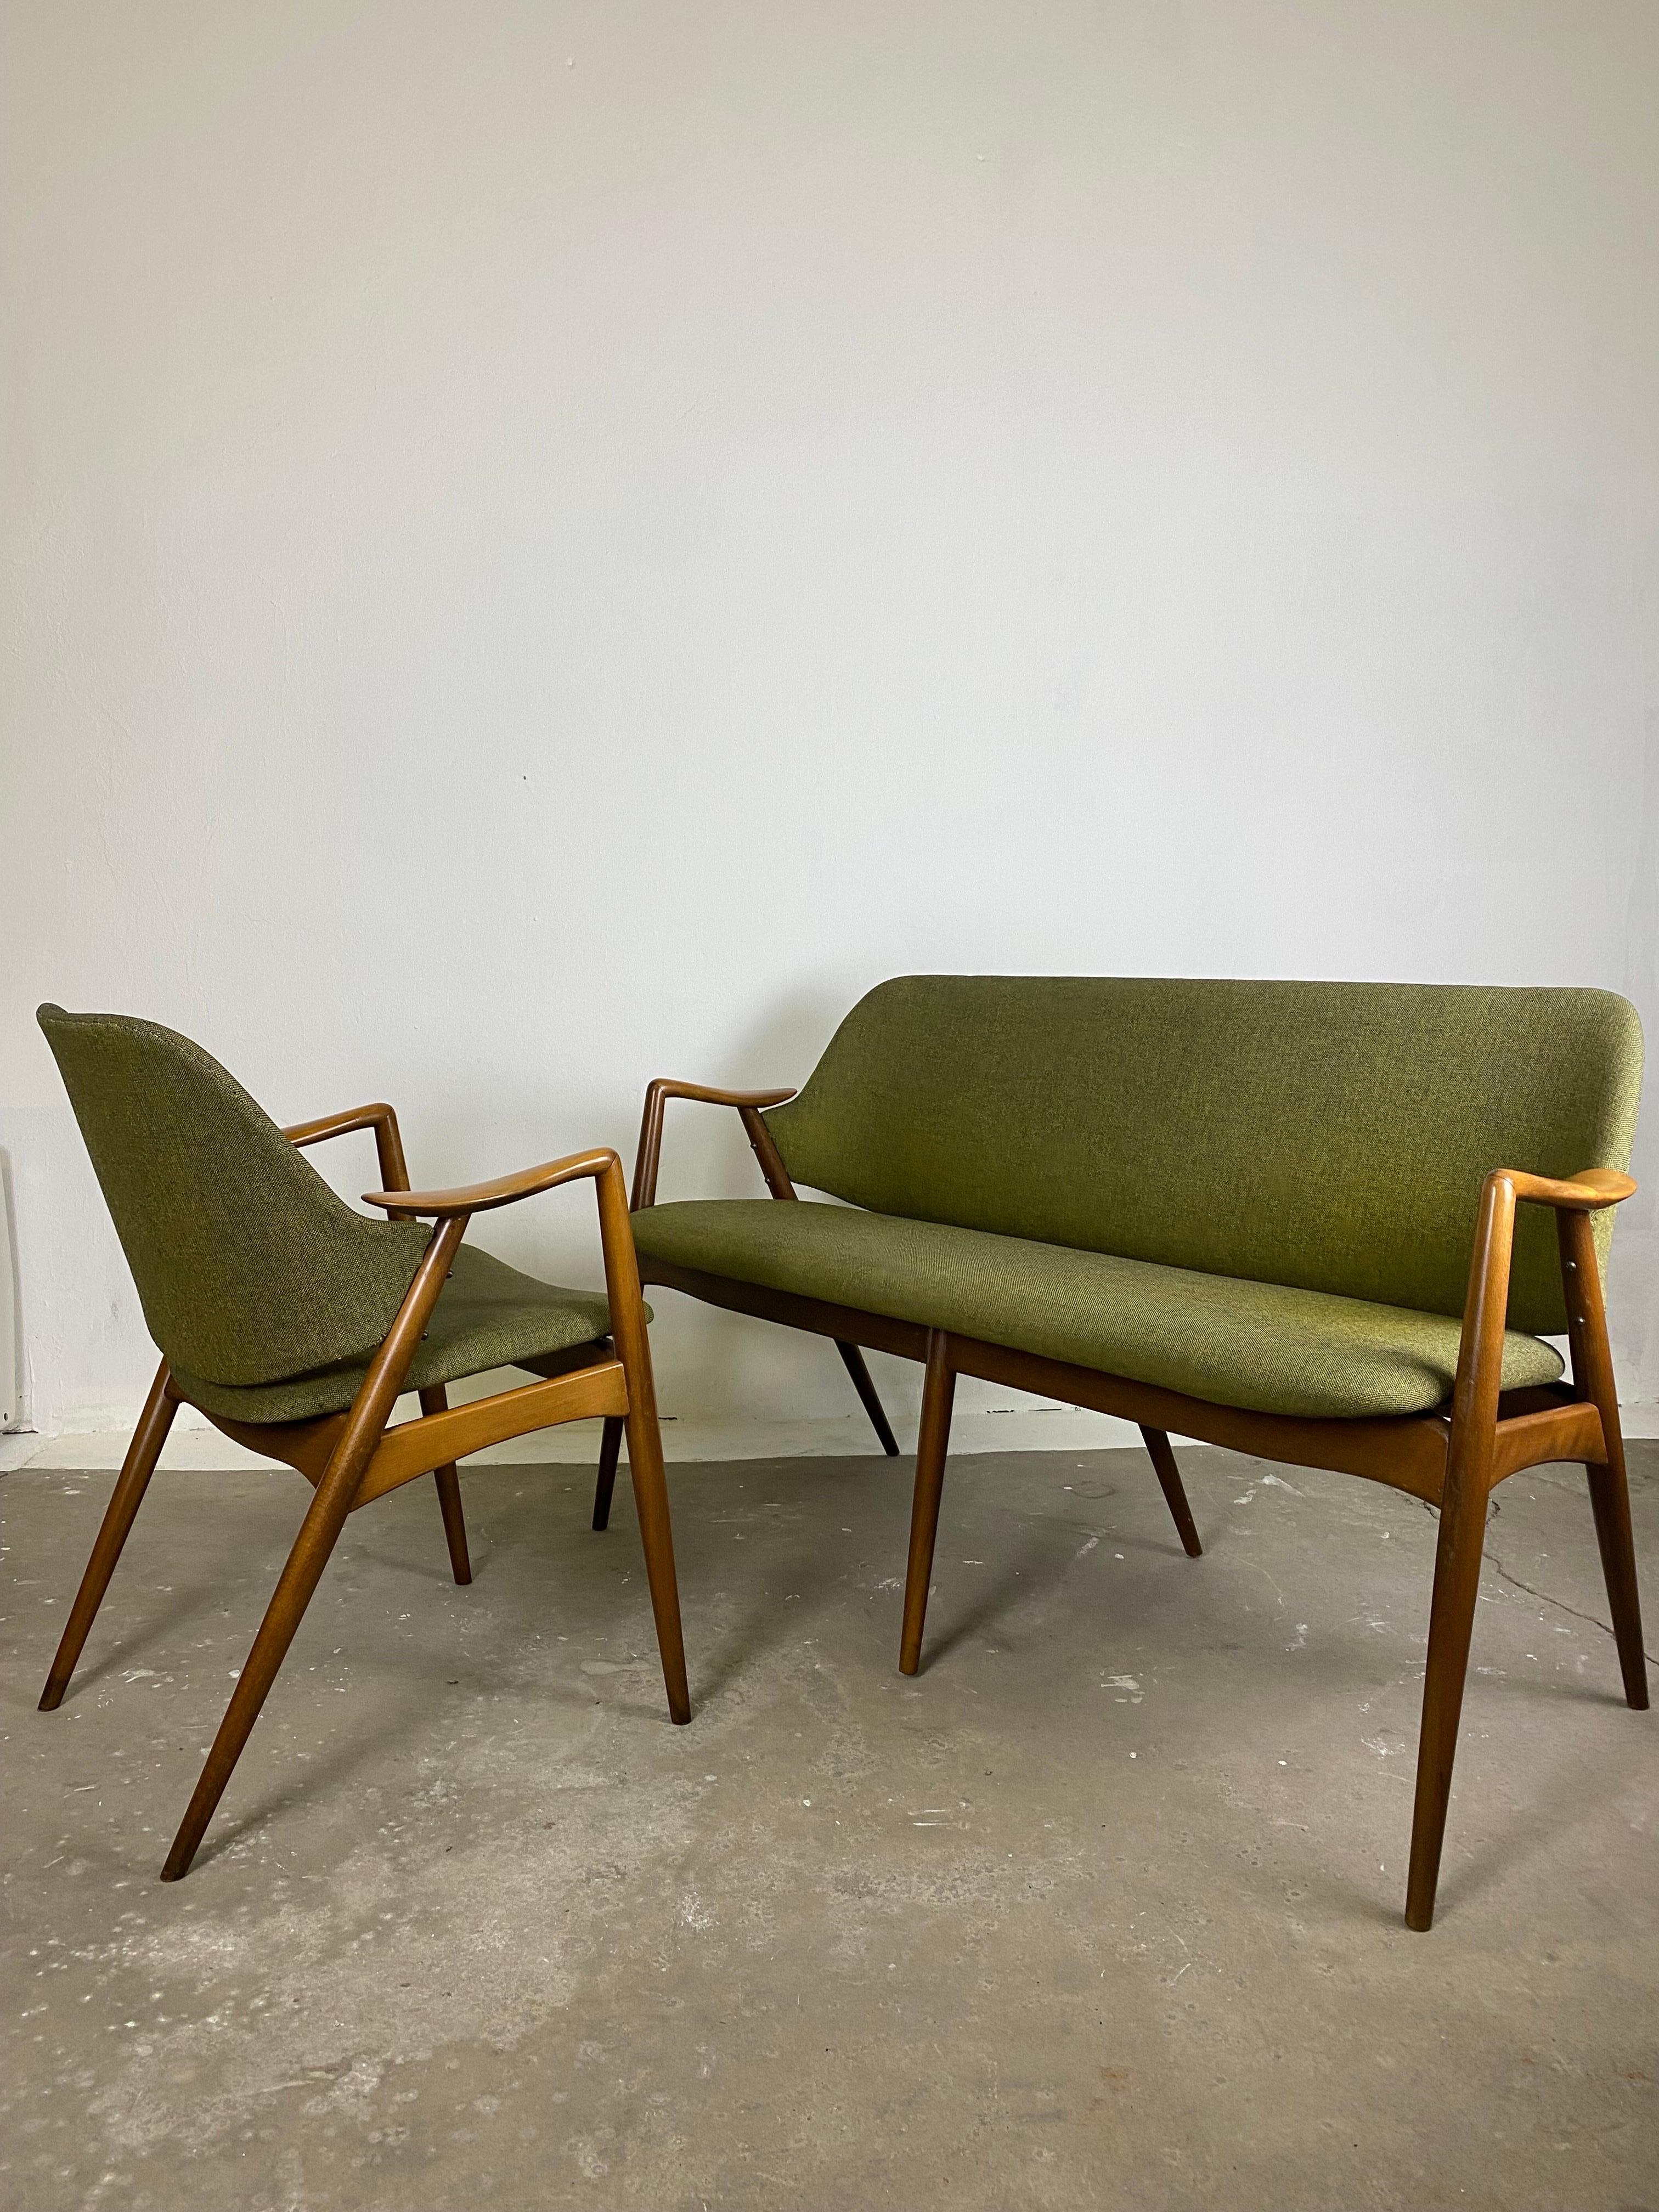 Mid-20th Century Midcentury Kontur Set of 2  Chairs by Alf Svensson for Dux Sweden 1950s For Sale